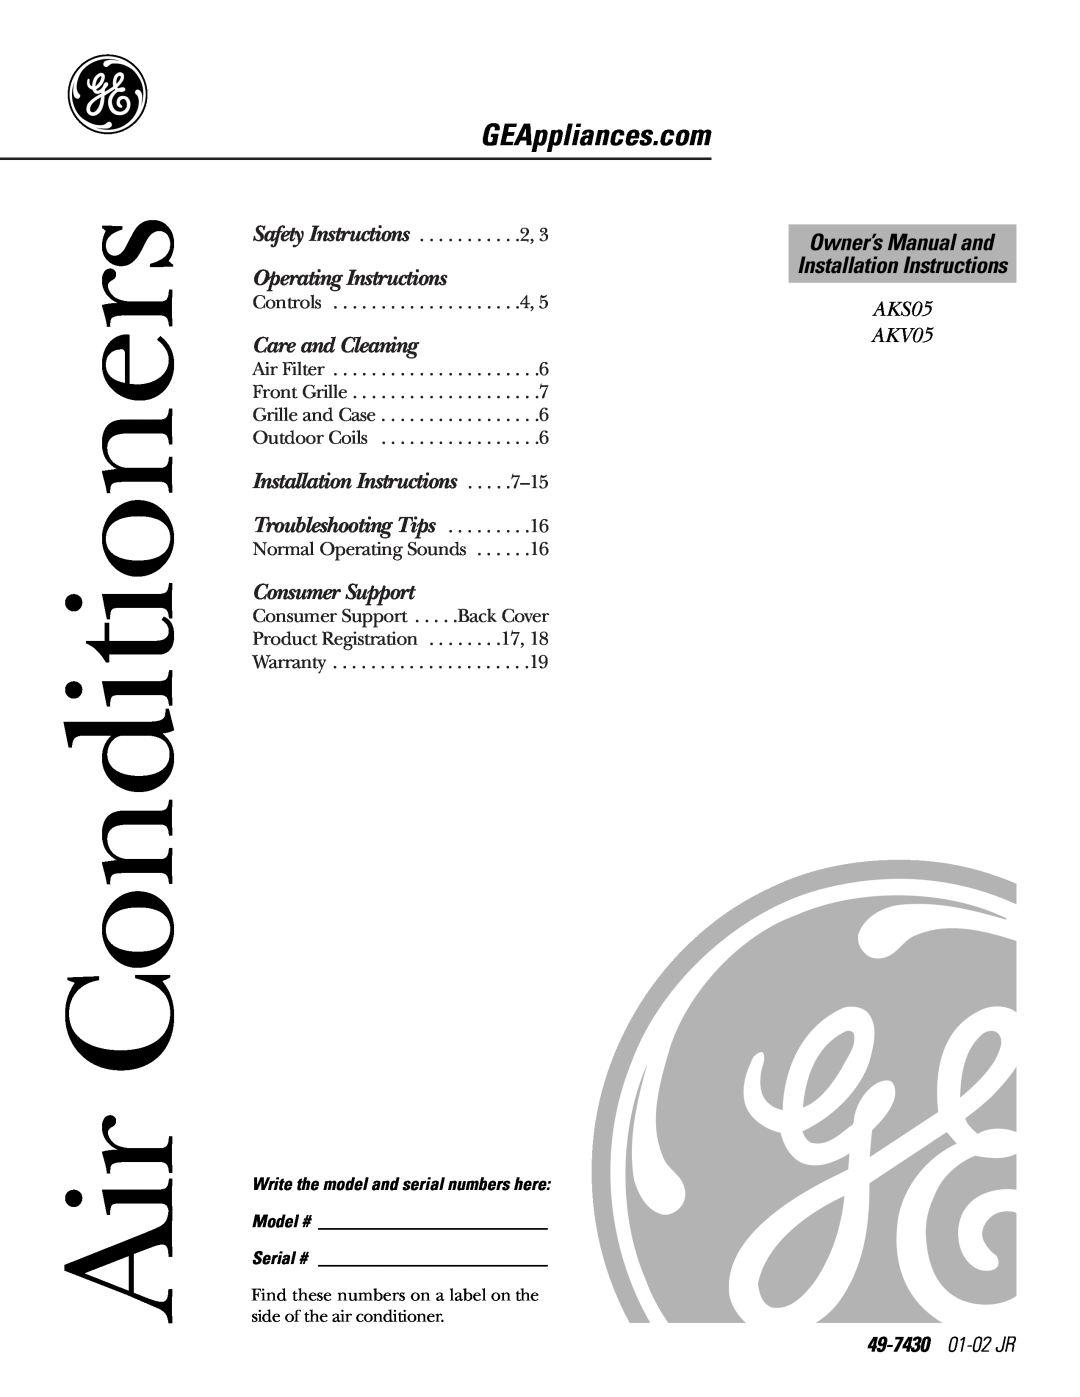 GE AKS05 owner manual 49-7430 01-02JR, Air Conditioners, Operating Instructions, Care and Cleaning, Troubleshooting Tips 